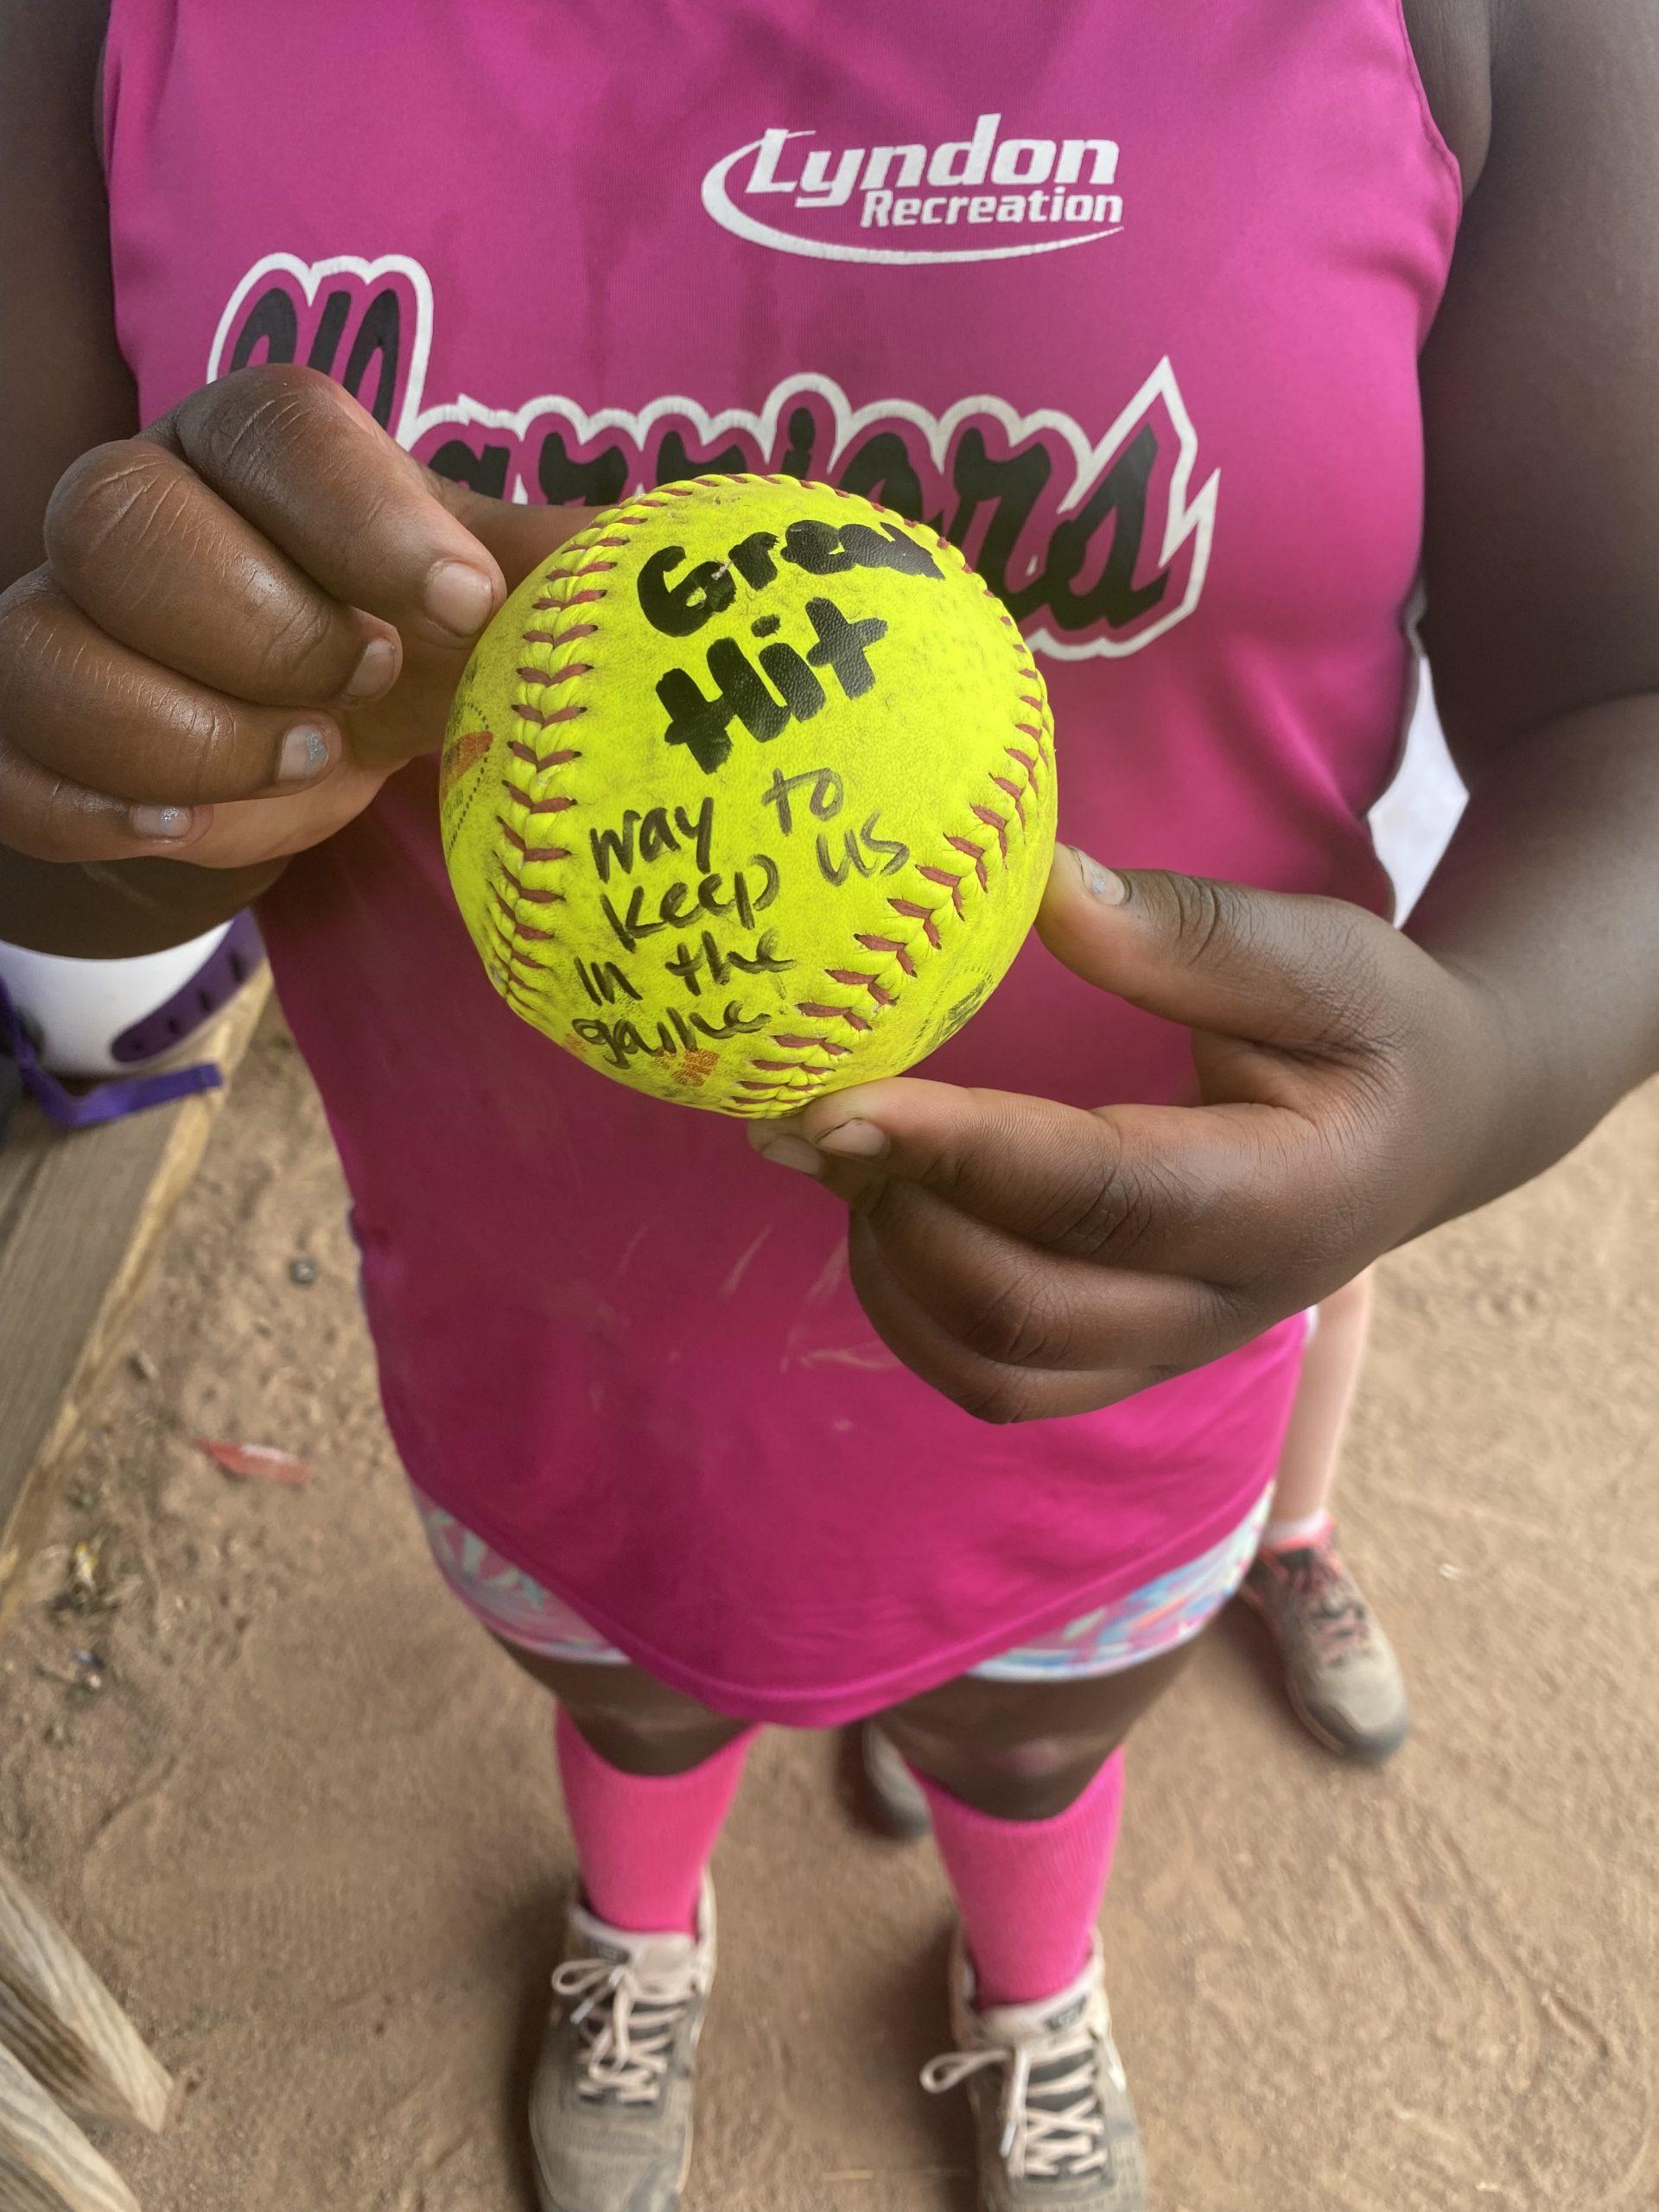 Colby’s game ball (Devon’s daughter)